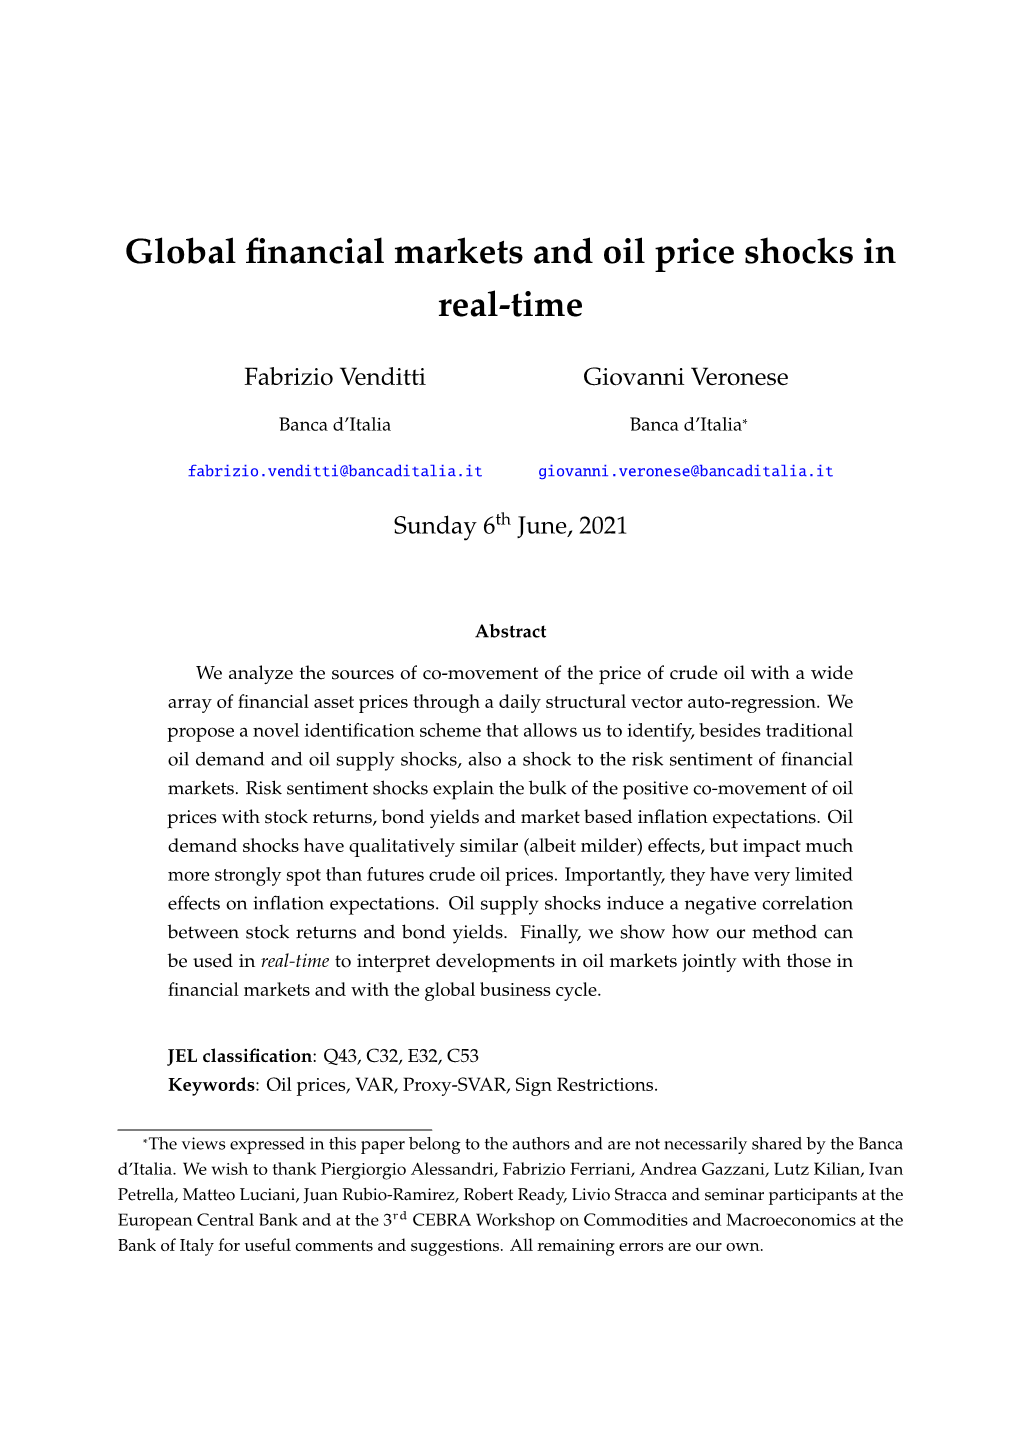 Global Financial Markets and Oil Price Shocks in Real-Time